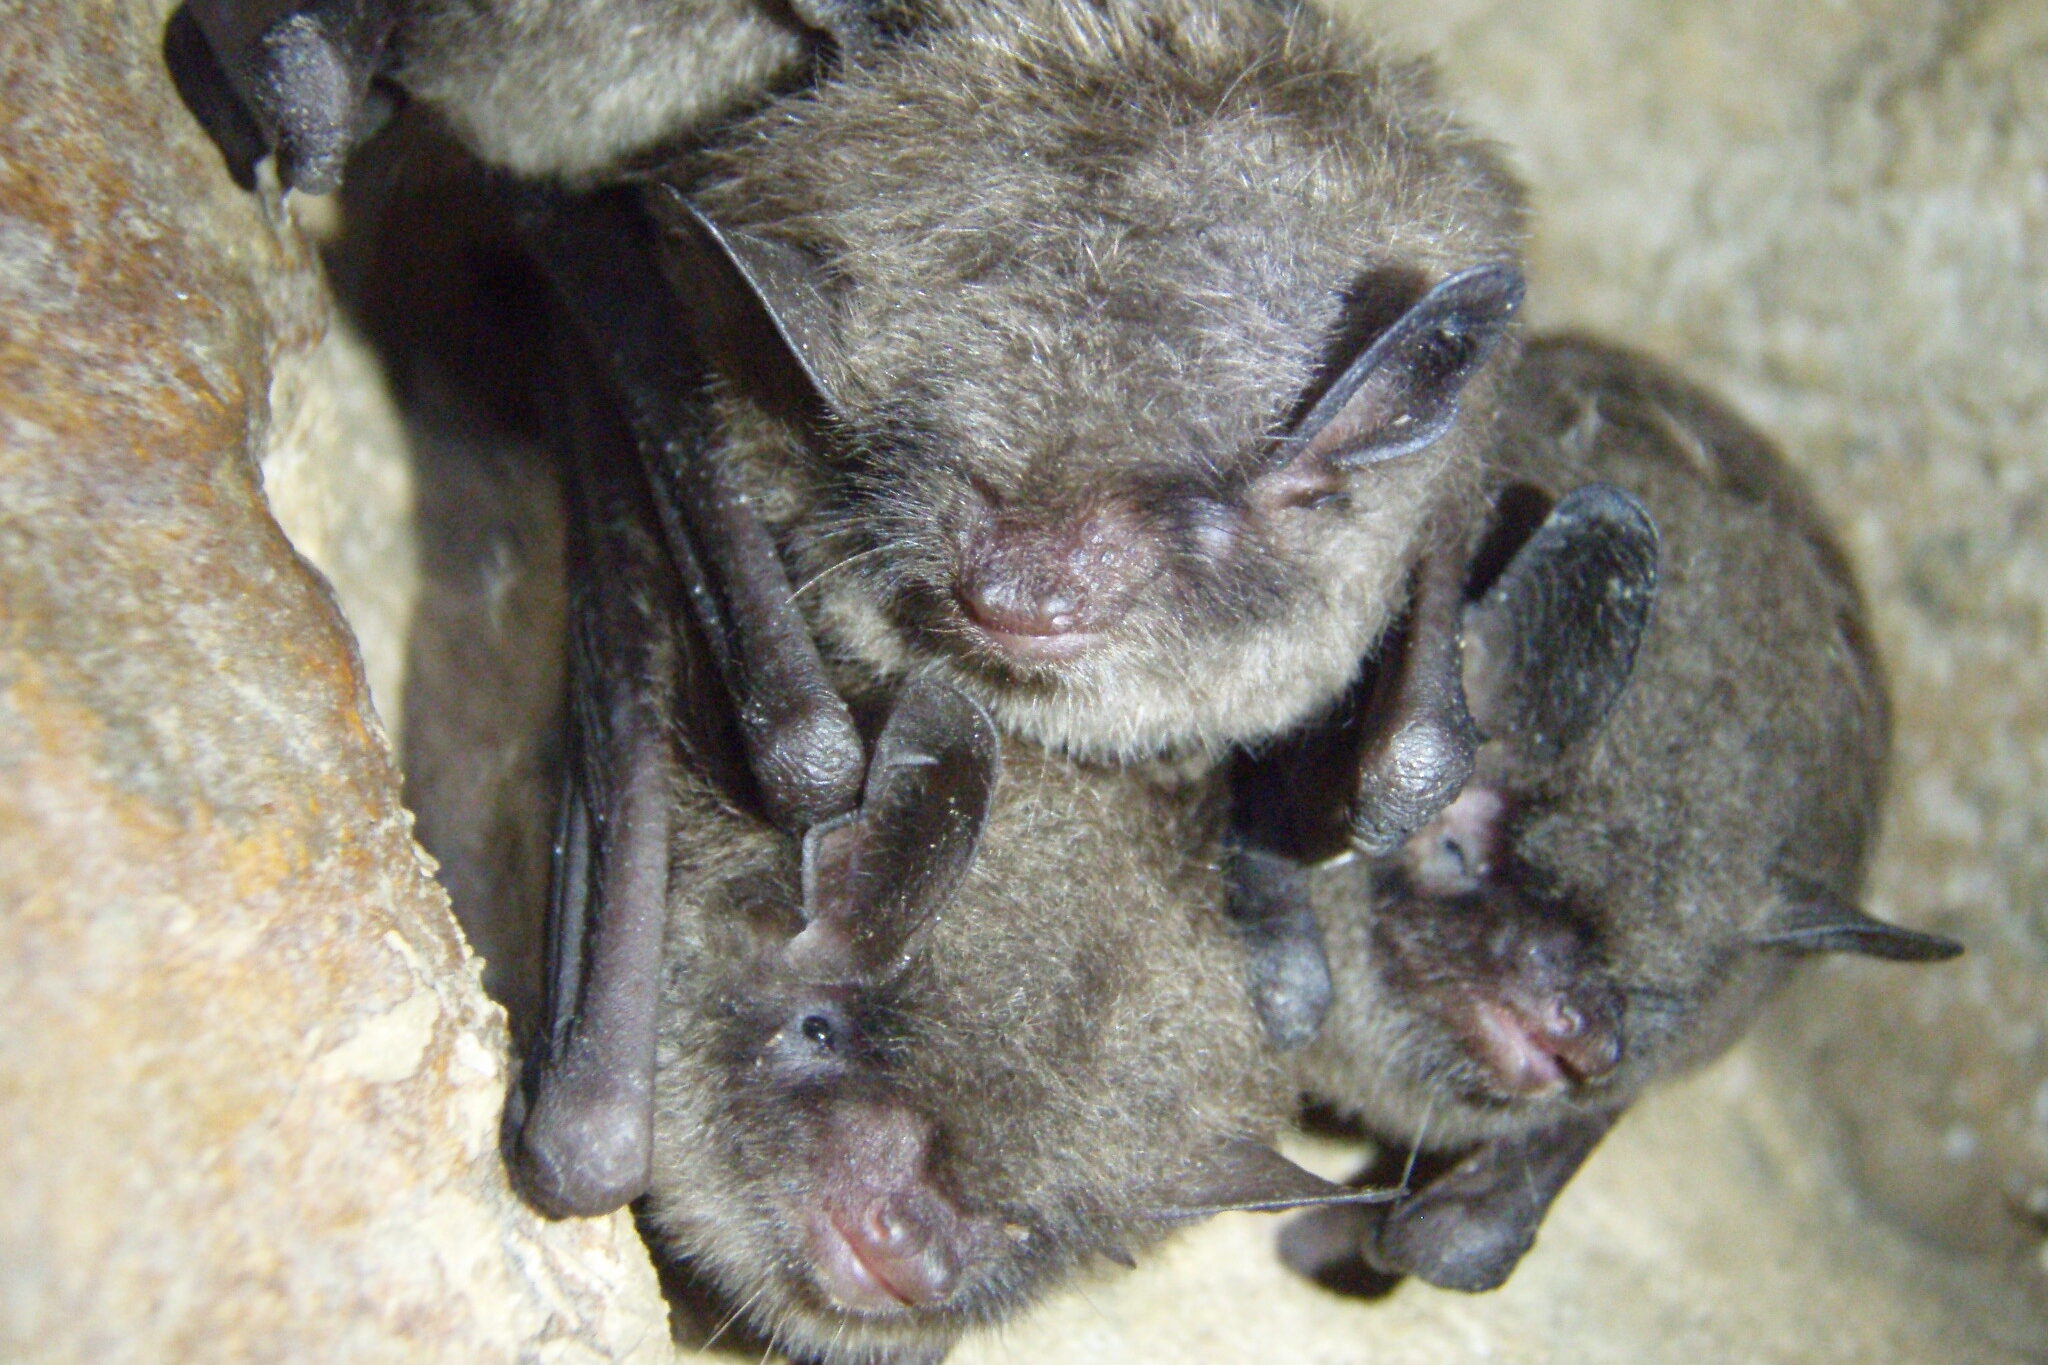 A cluster of gray bats hanging on a cave wall